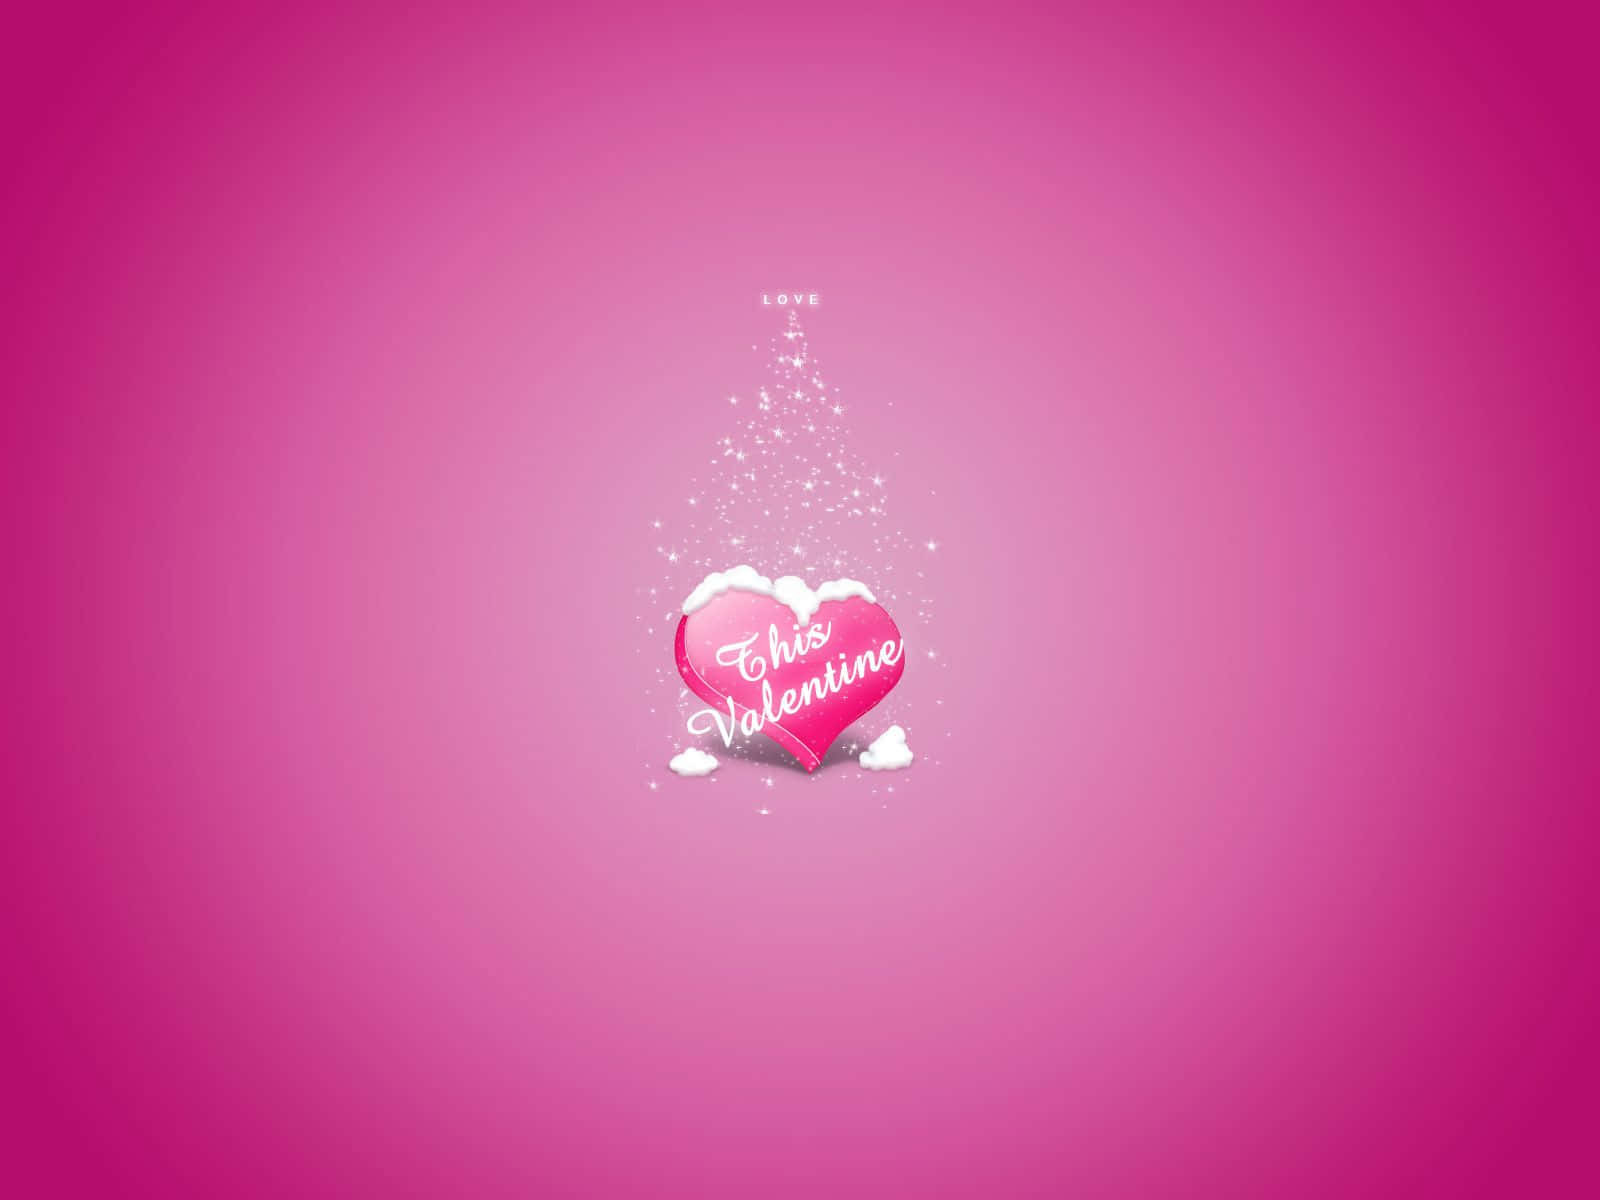 This Valentines Day Heart Background